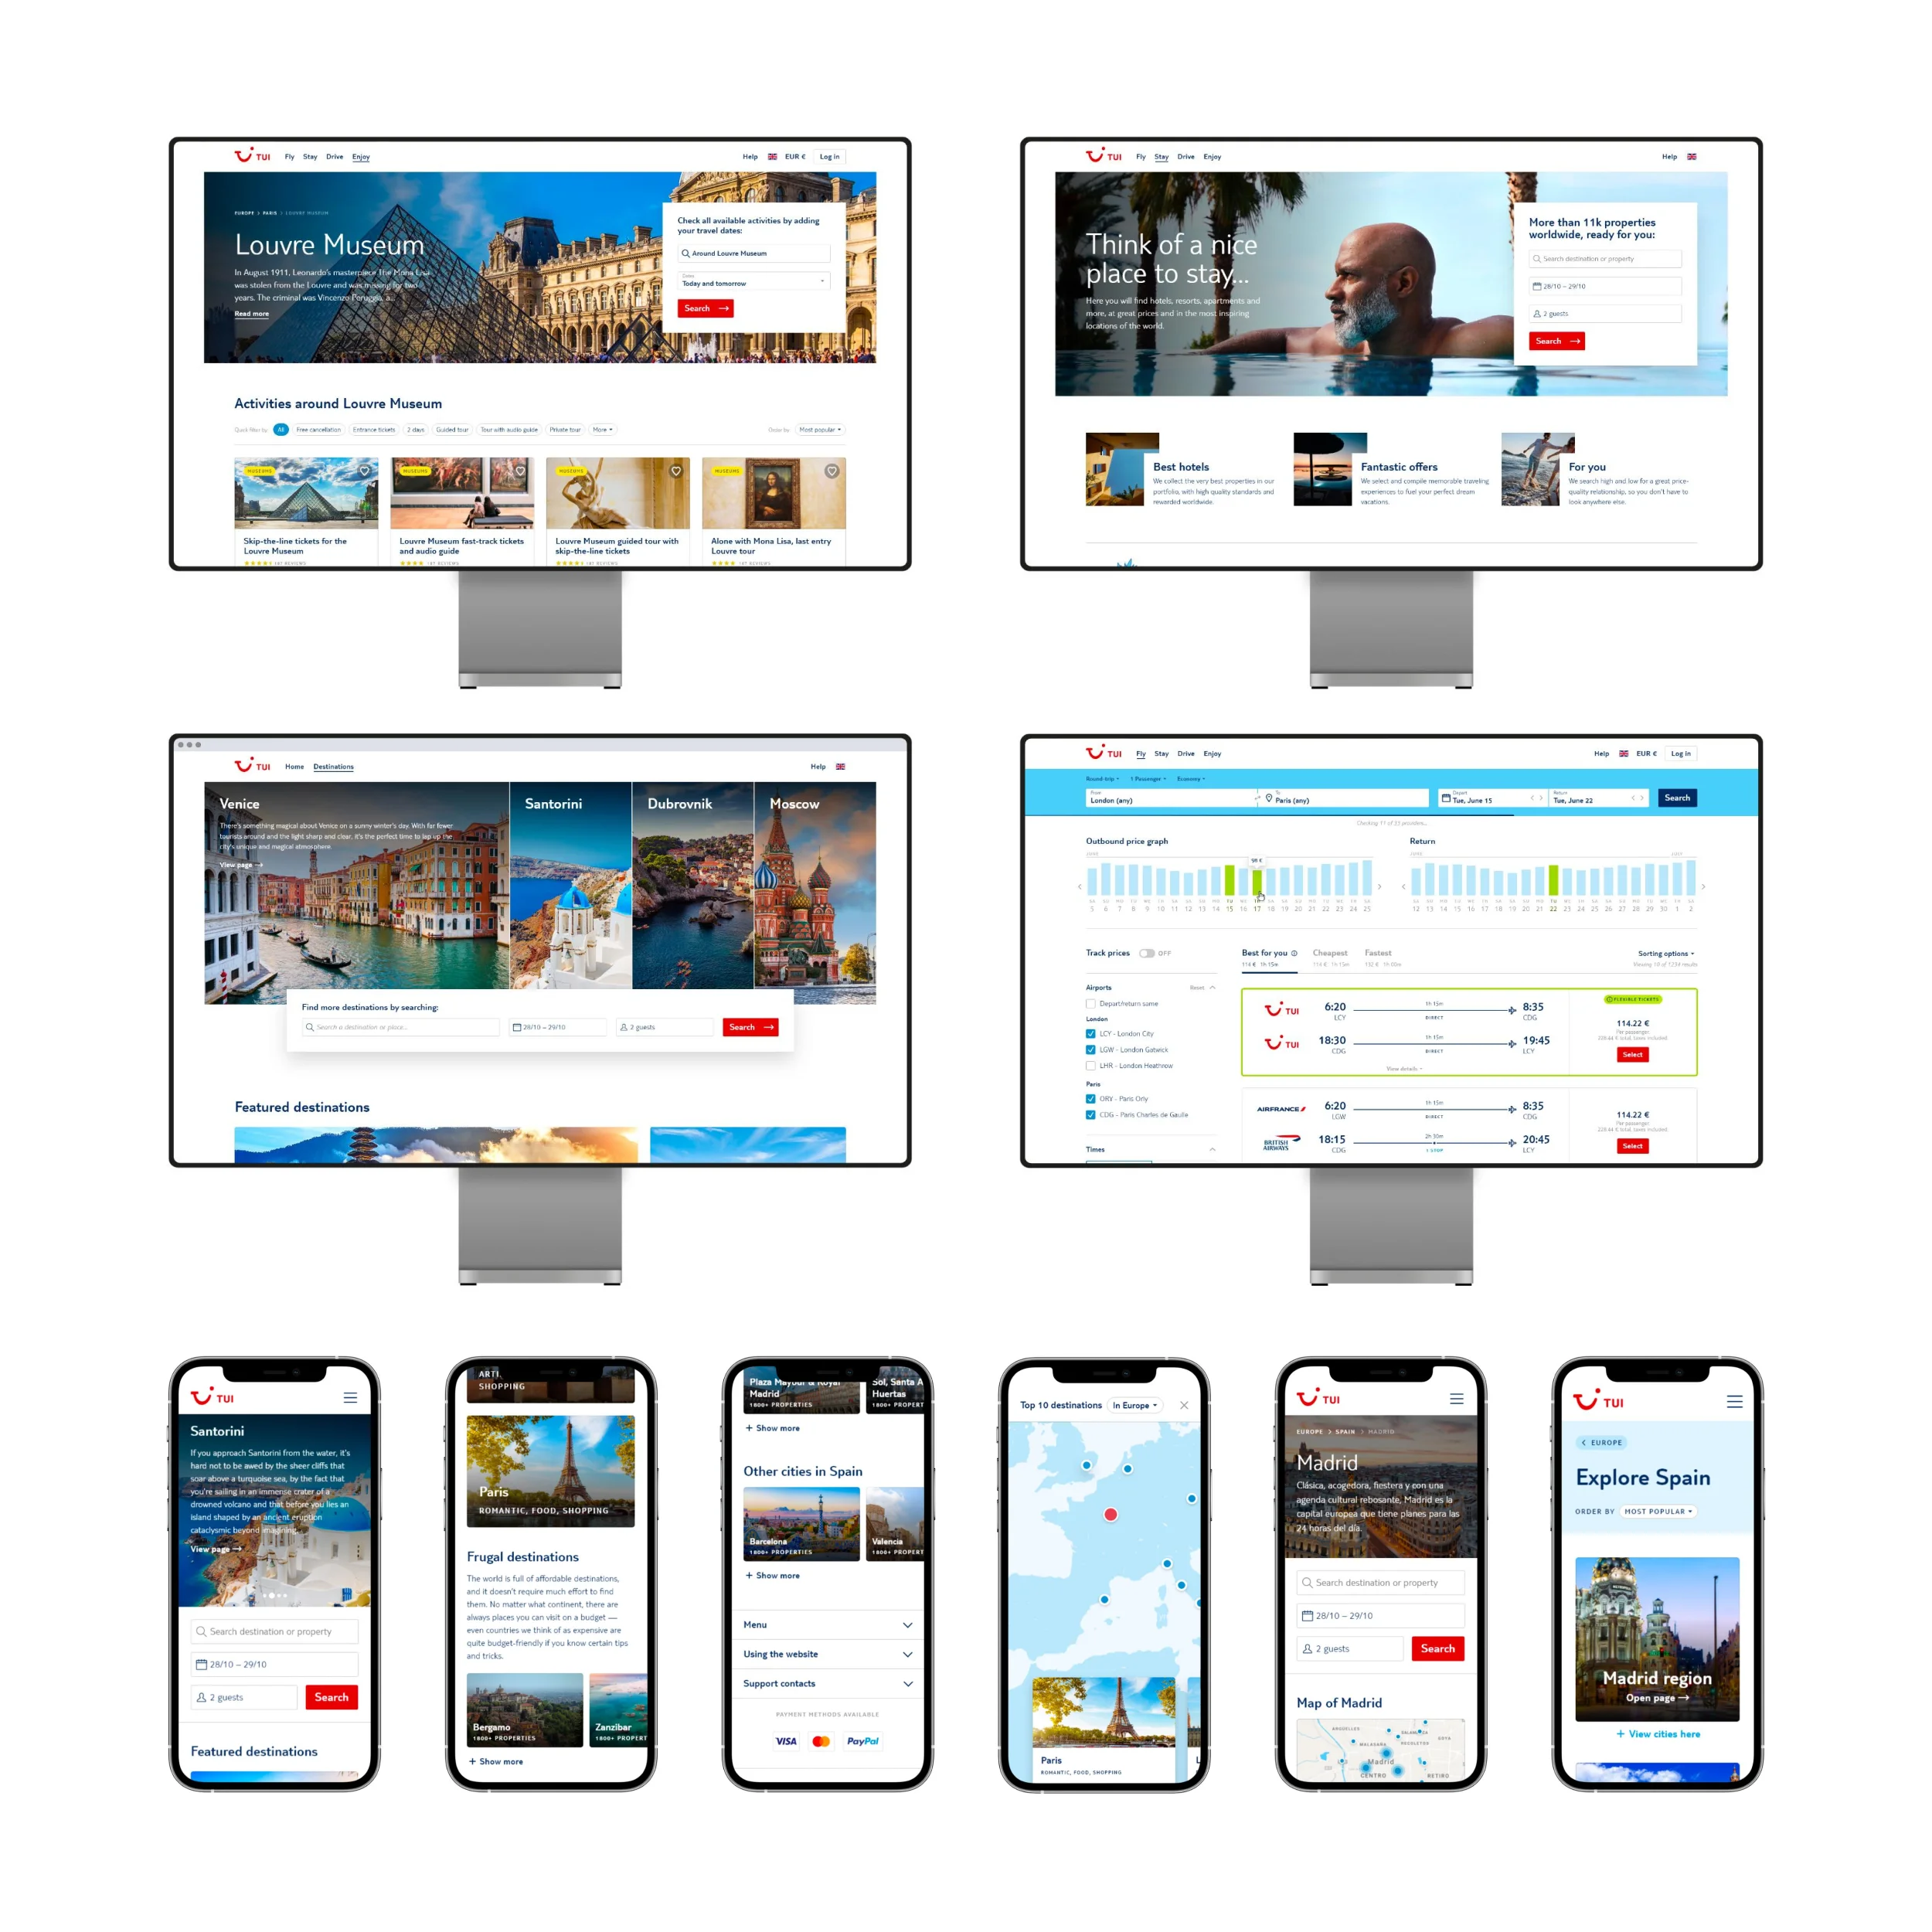 Series of mockups of an eCommerce website for travel experiences. It has a lot of imagery from travel destinations, featuring beaches, pools, and hotel imagery.